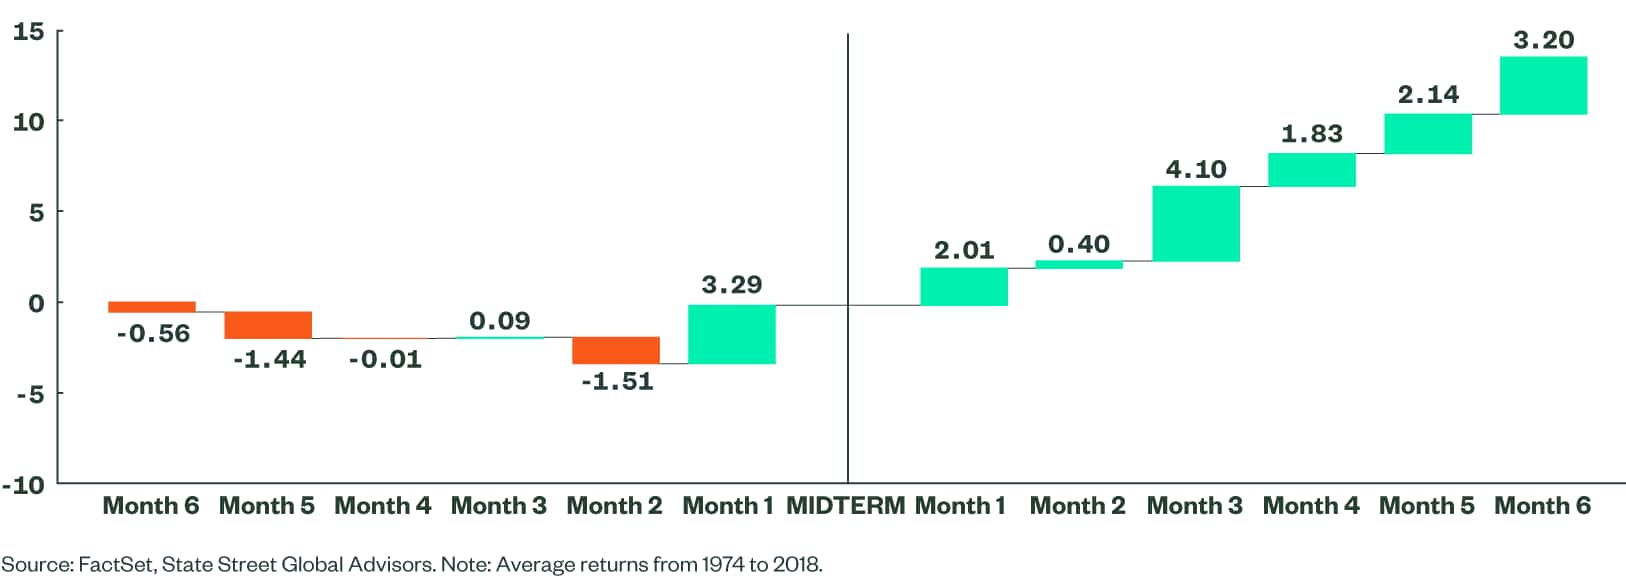 Figure 1: Average Returns 6 Months Before and After Midterm Elections Since 1974